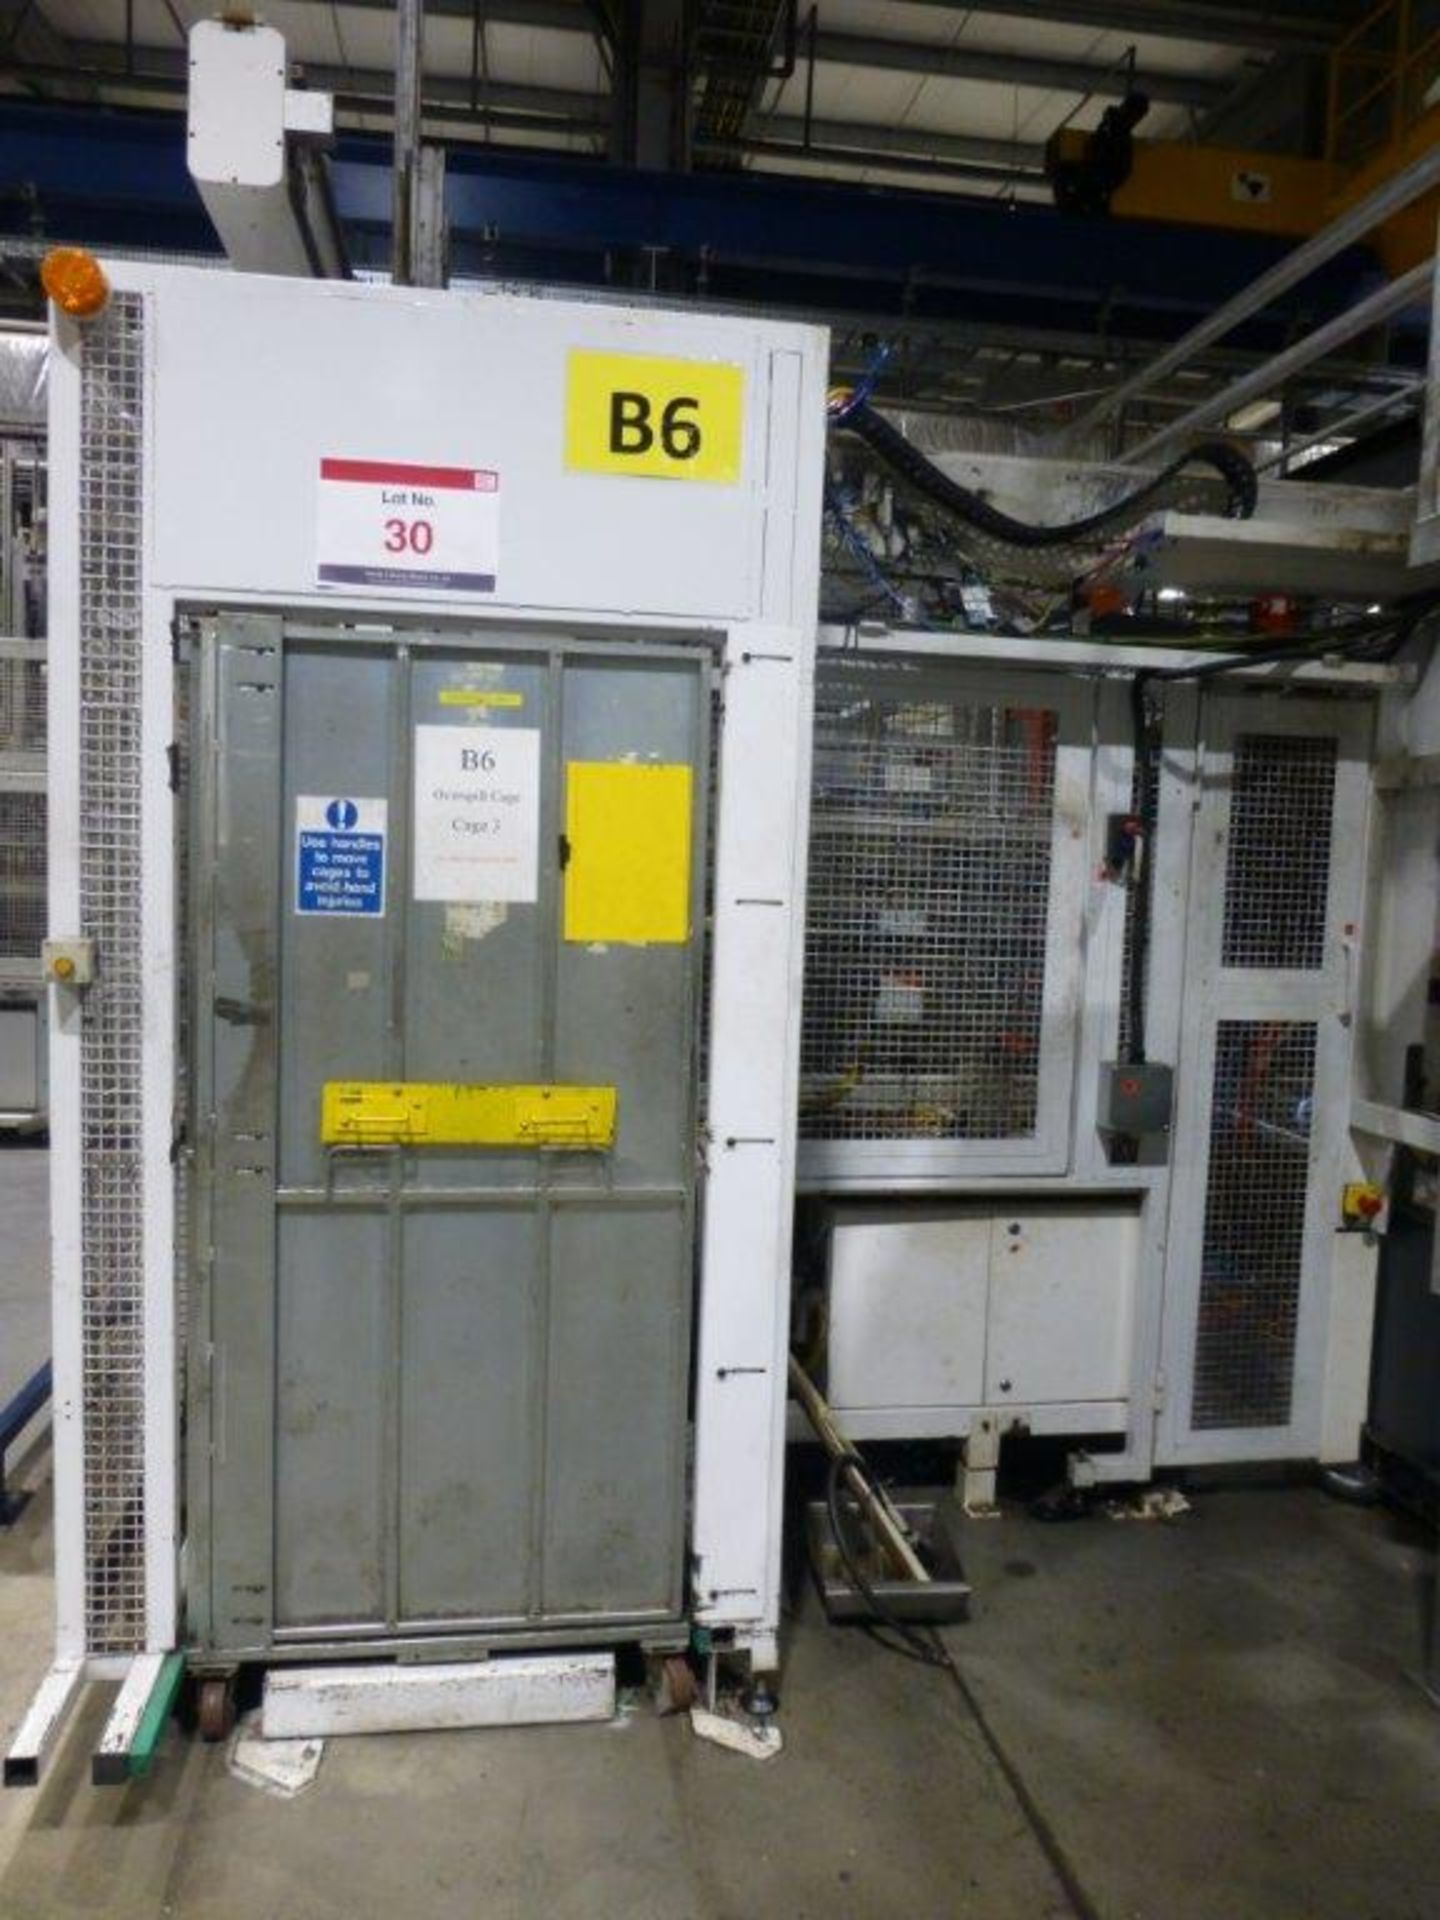 GMAT Model M53 CNC automated DVD case twin arm picking/stacking system with case closure unit, - Bild 4 aus 8